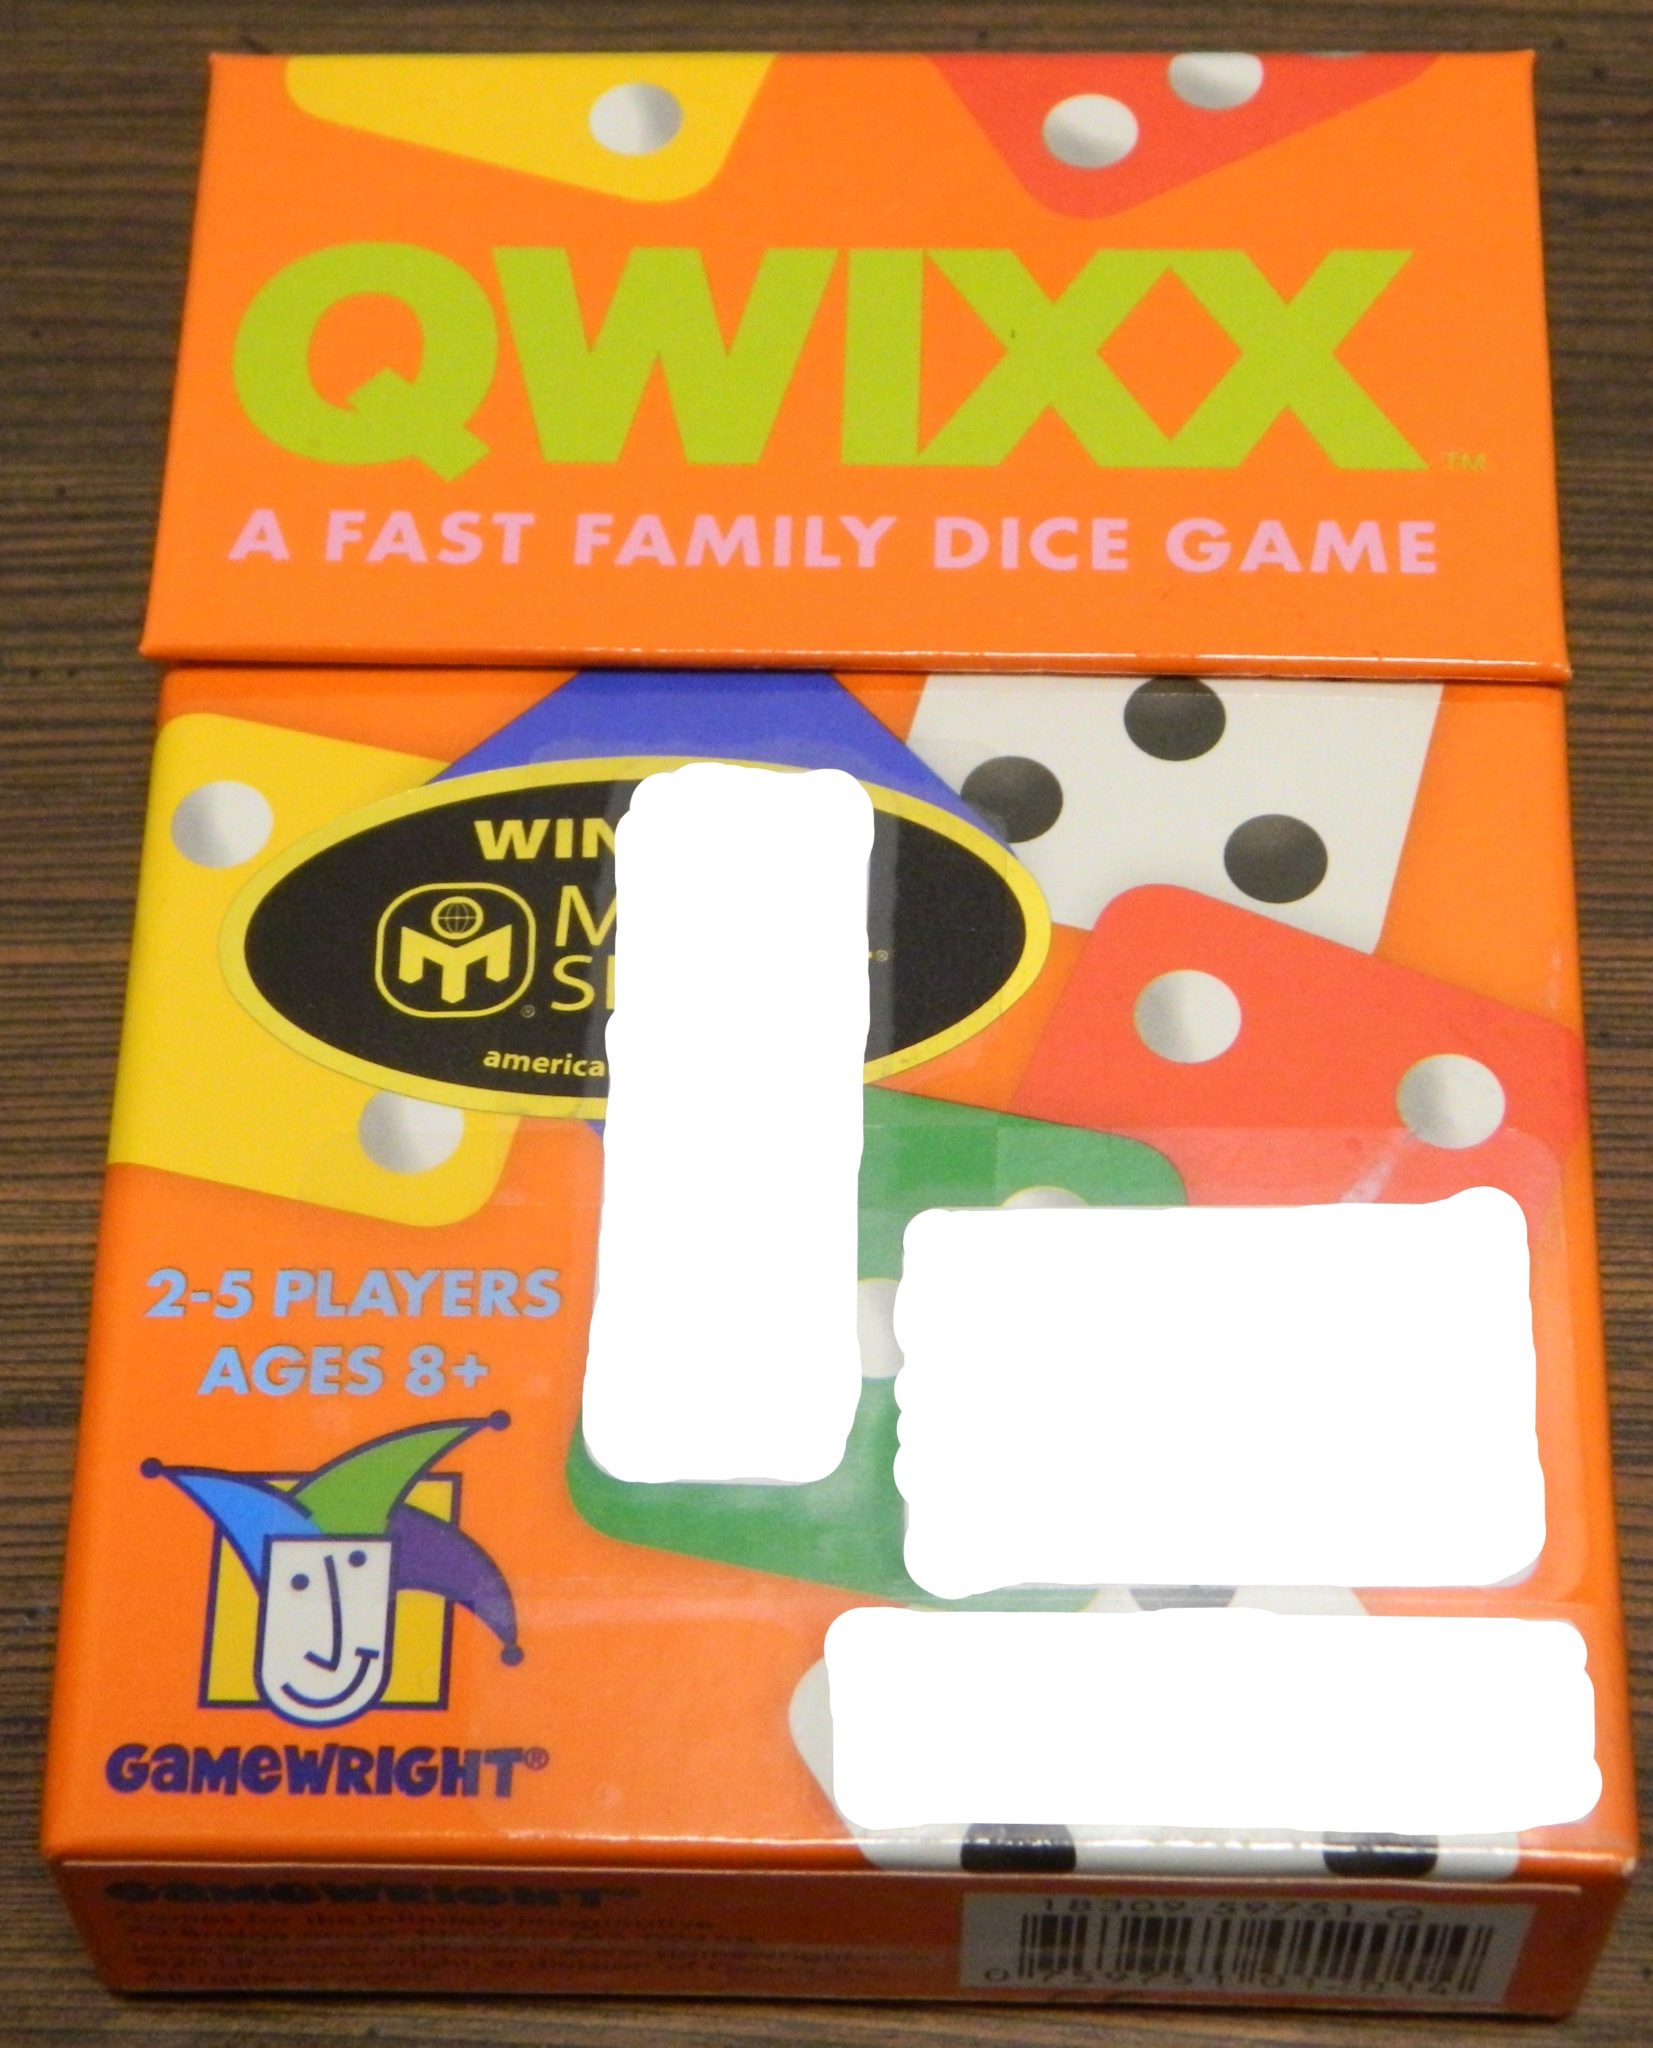 Box for Qwixx